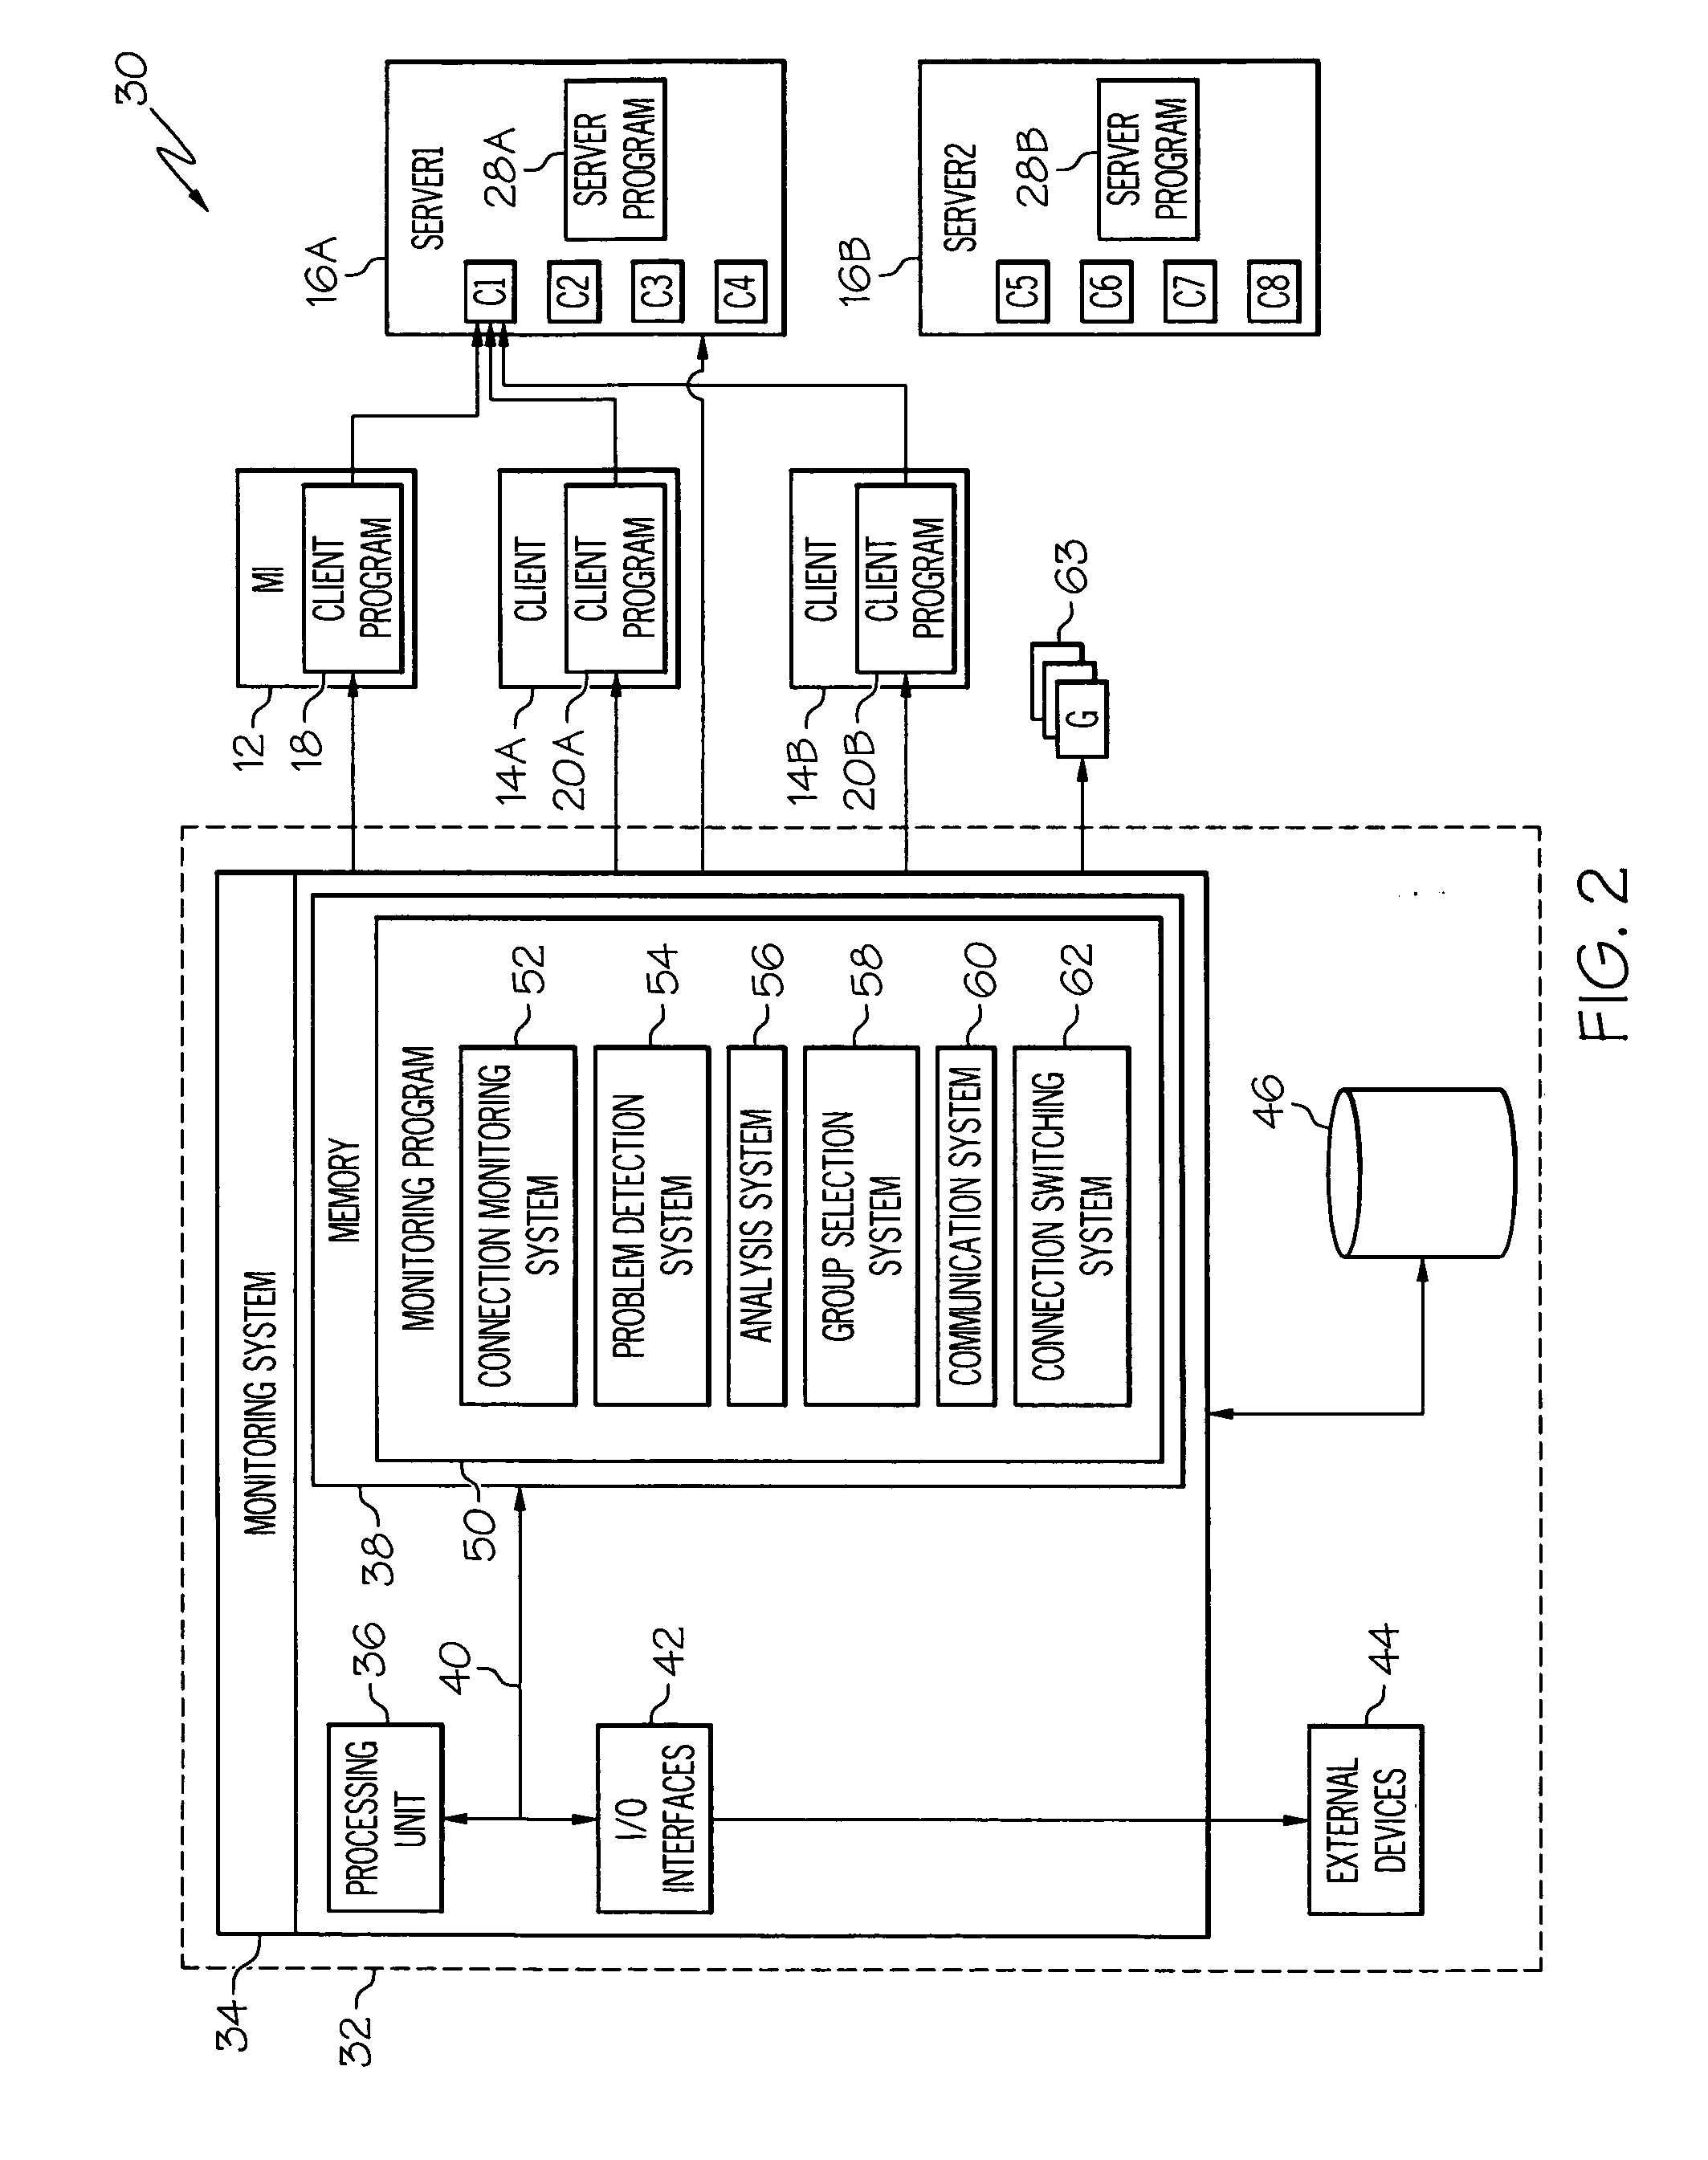 Method, system and program product for monitoring client programs in a client-server environment